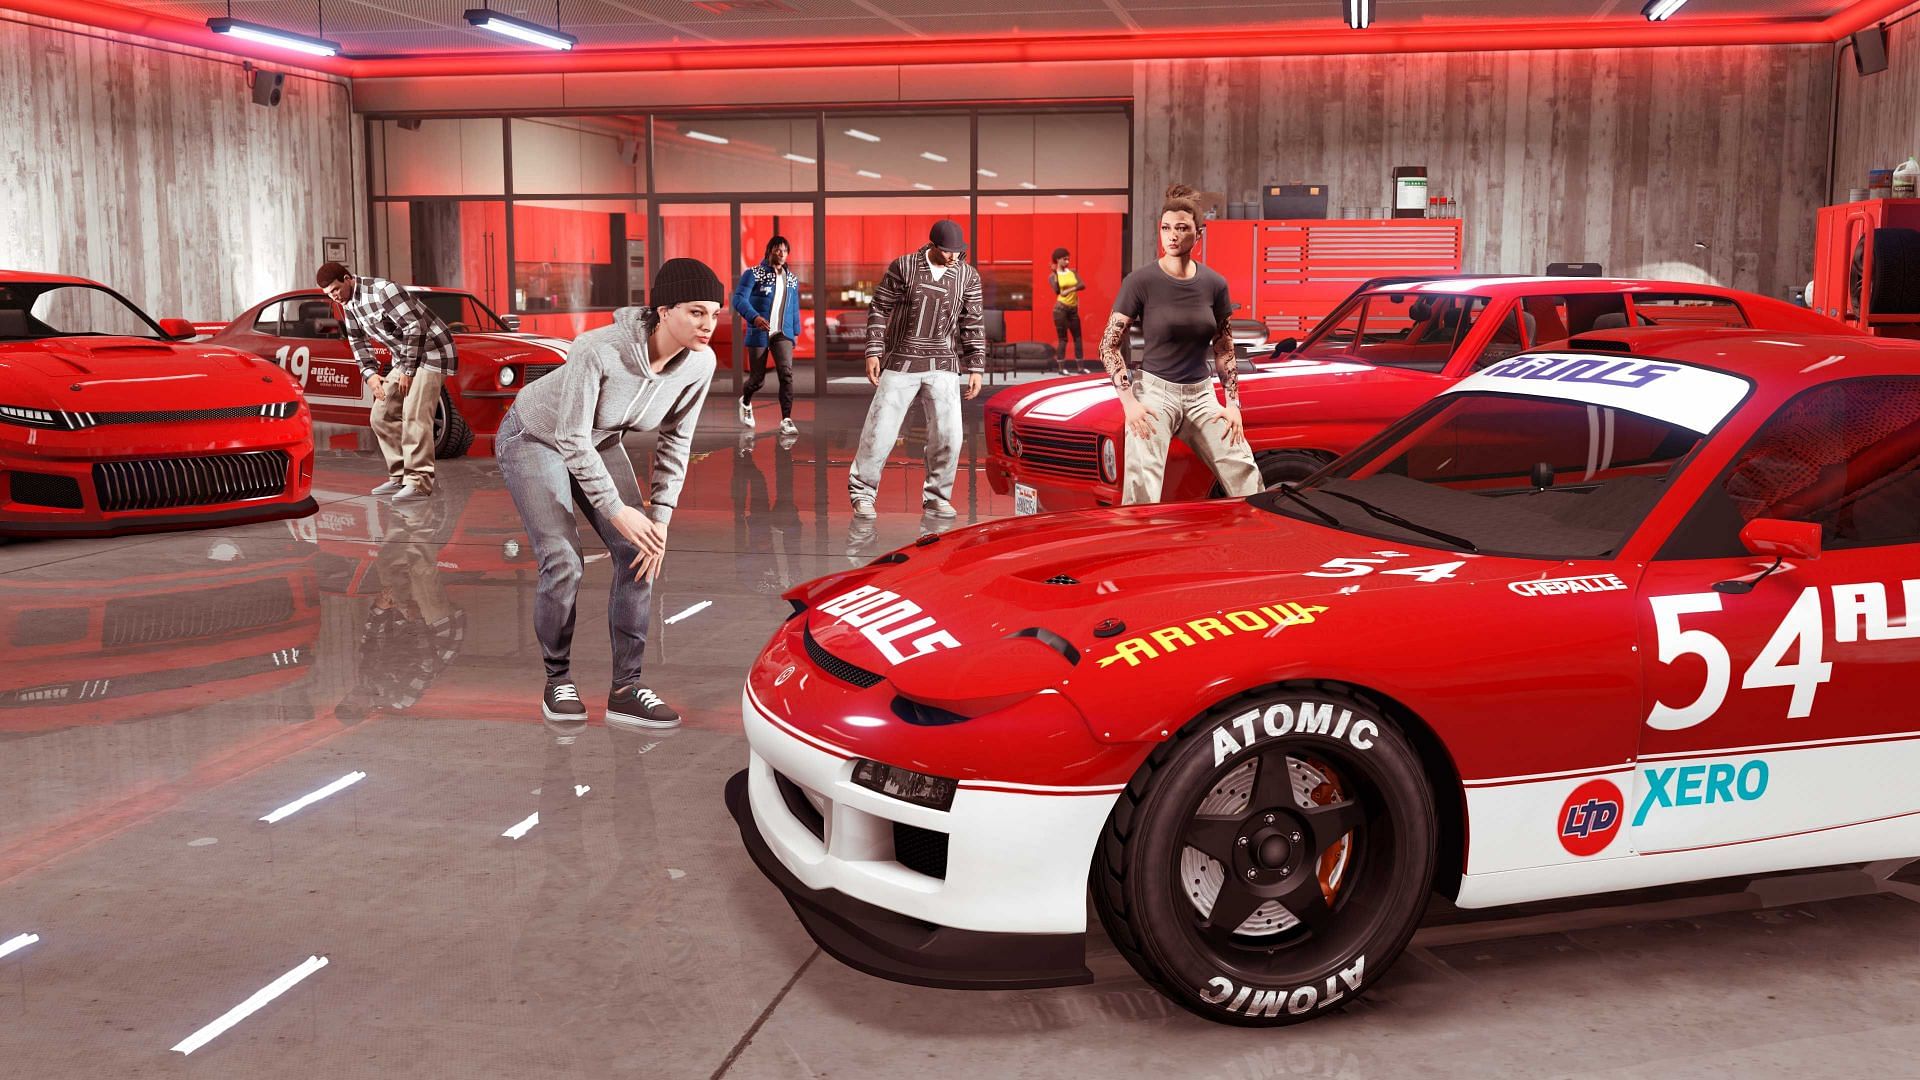 A player showing off their rides (Image via Rockstar Games)